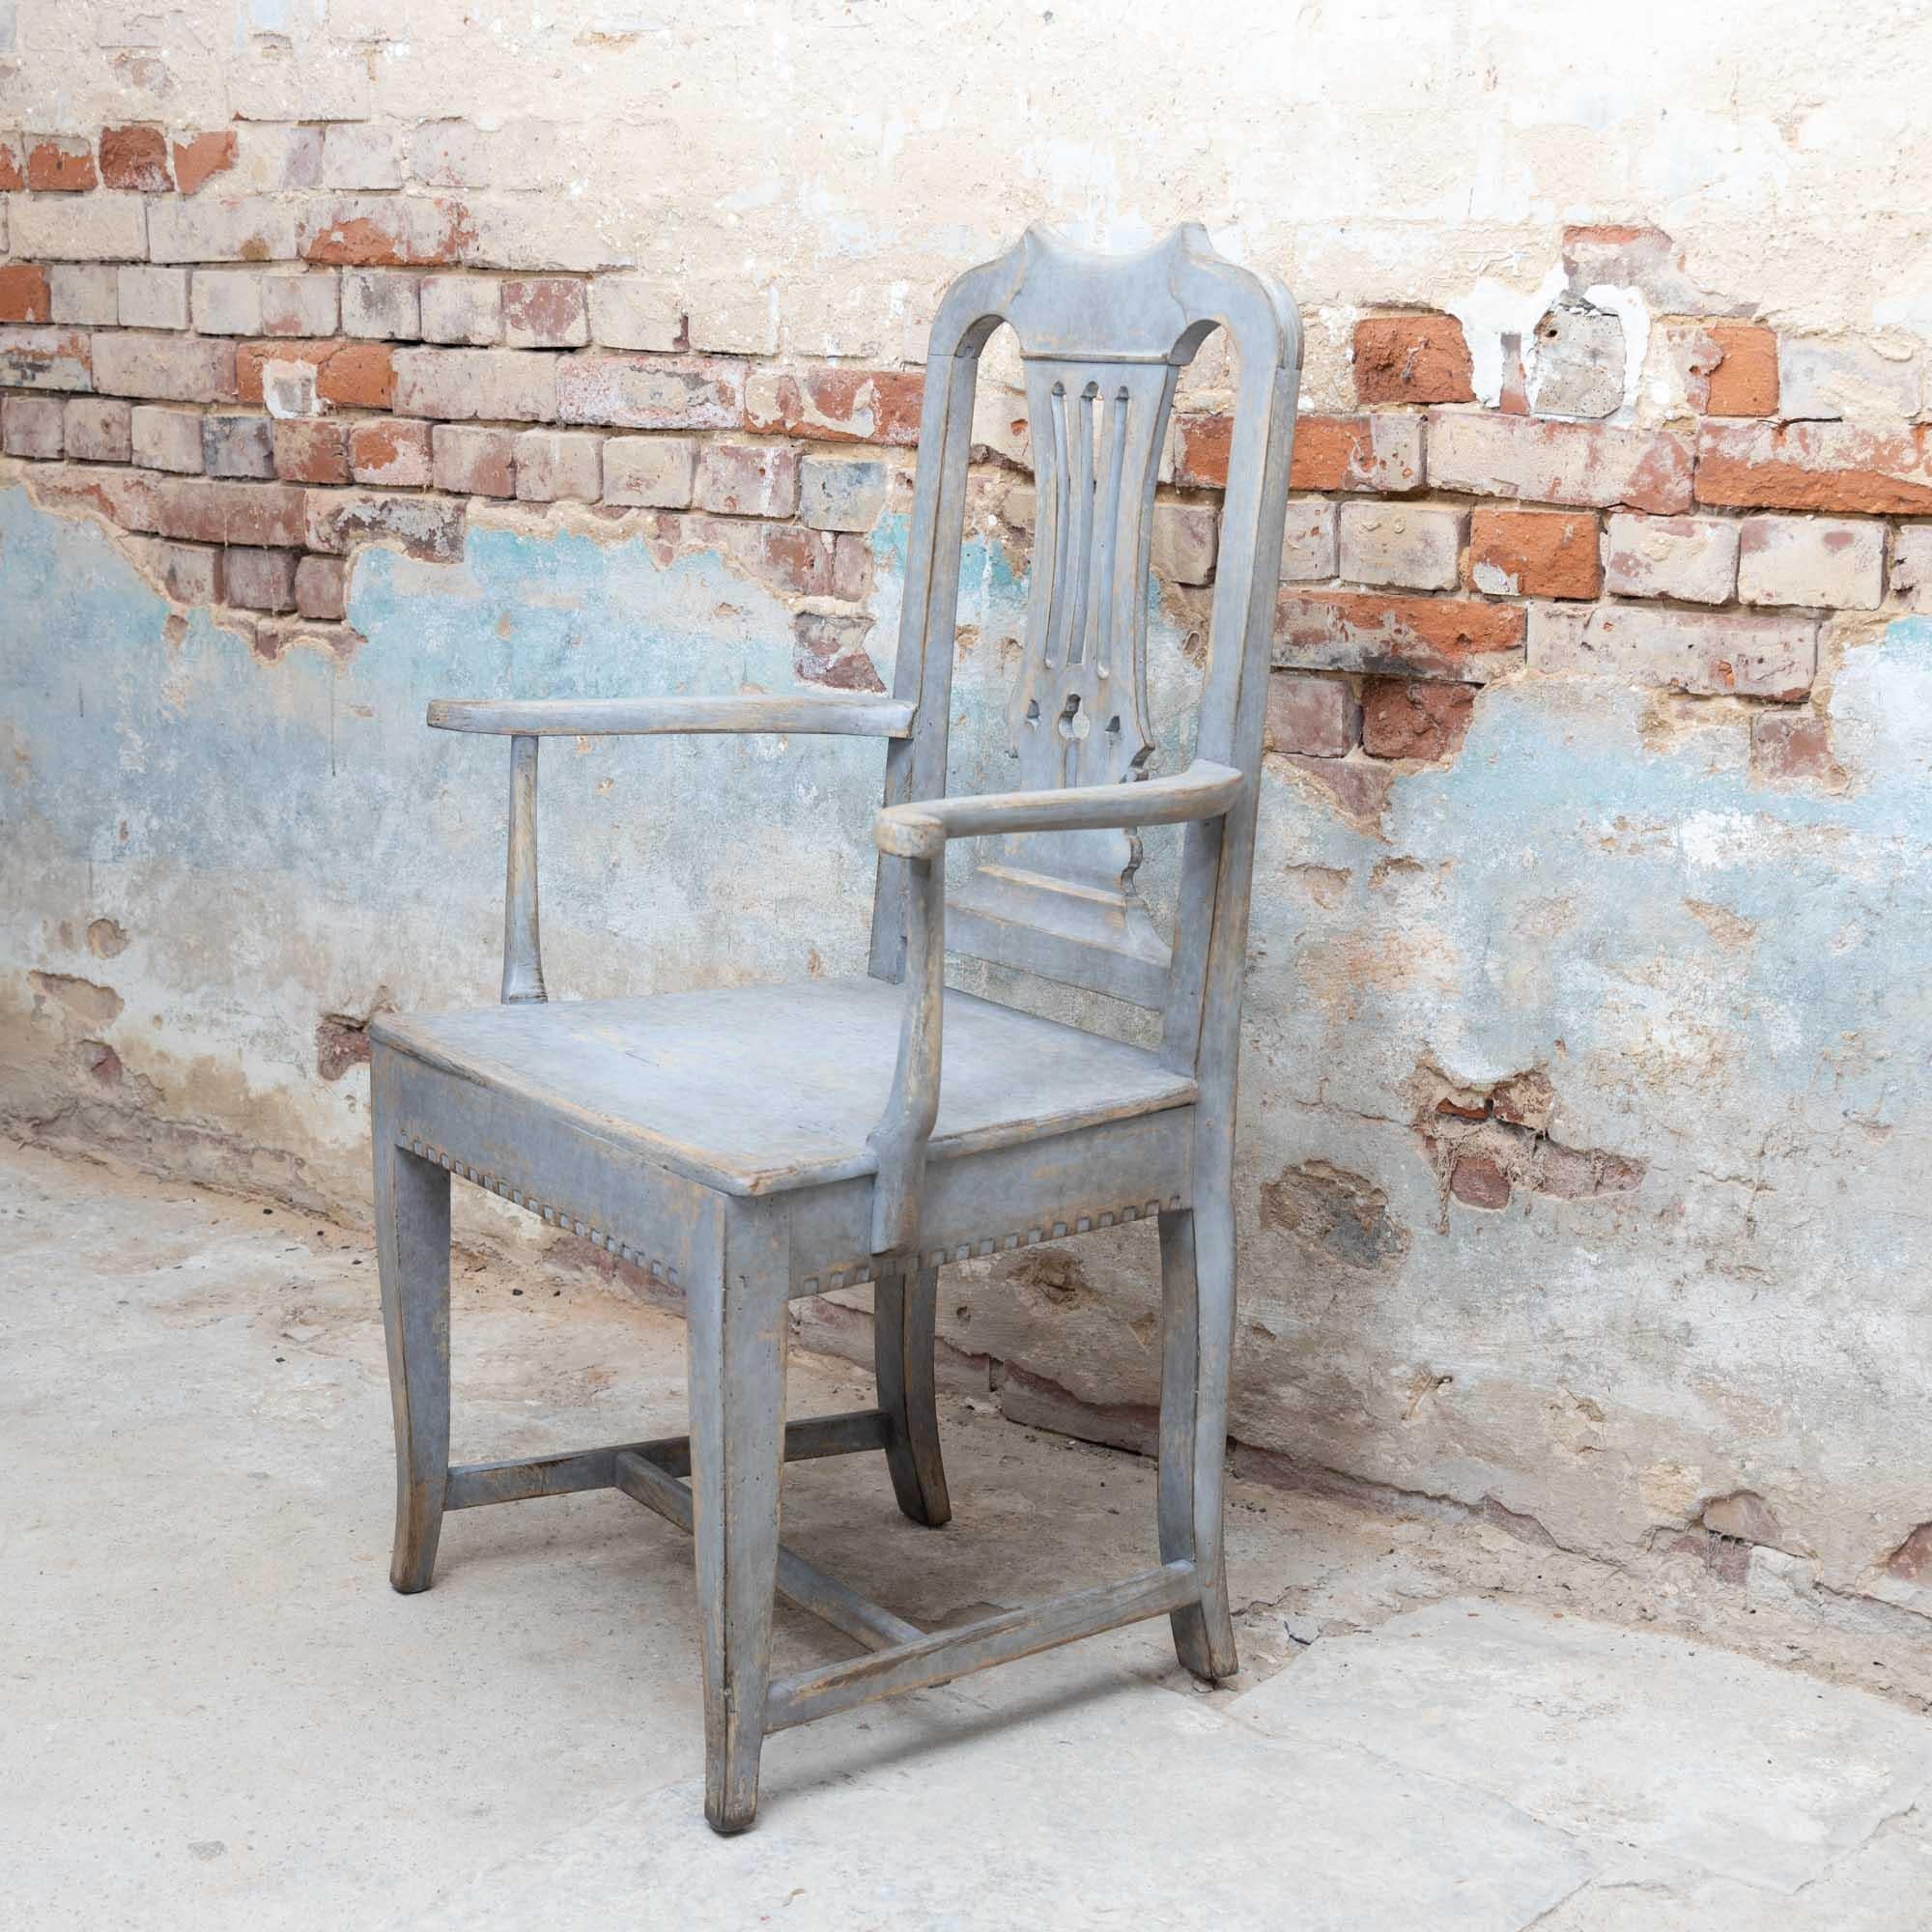 Armchair with rounded backrest with lyre-shaped central bar and tooth cut on the front frame. The frame in grey-blue is new and has been decoratively patinated.